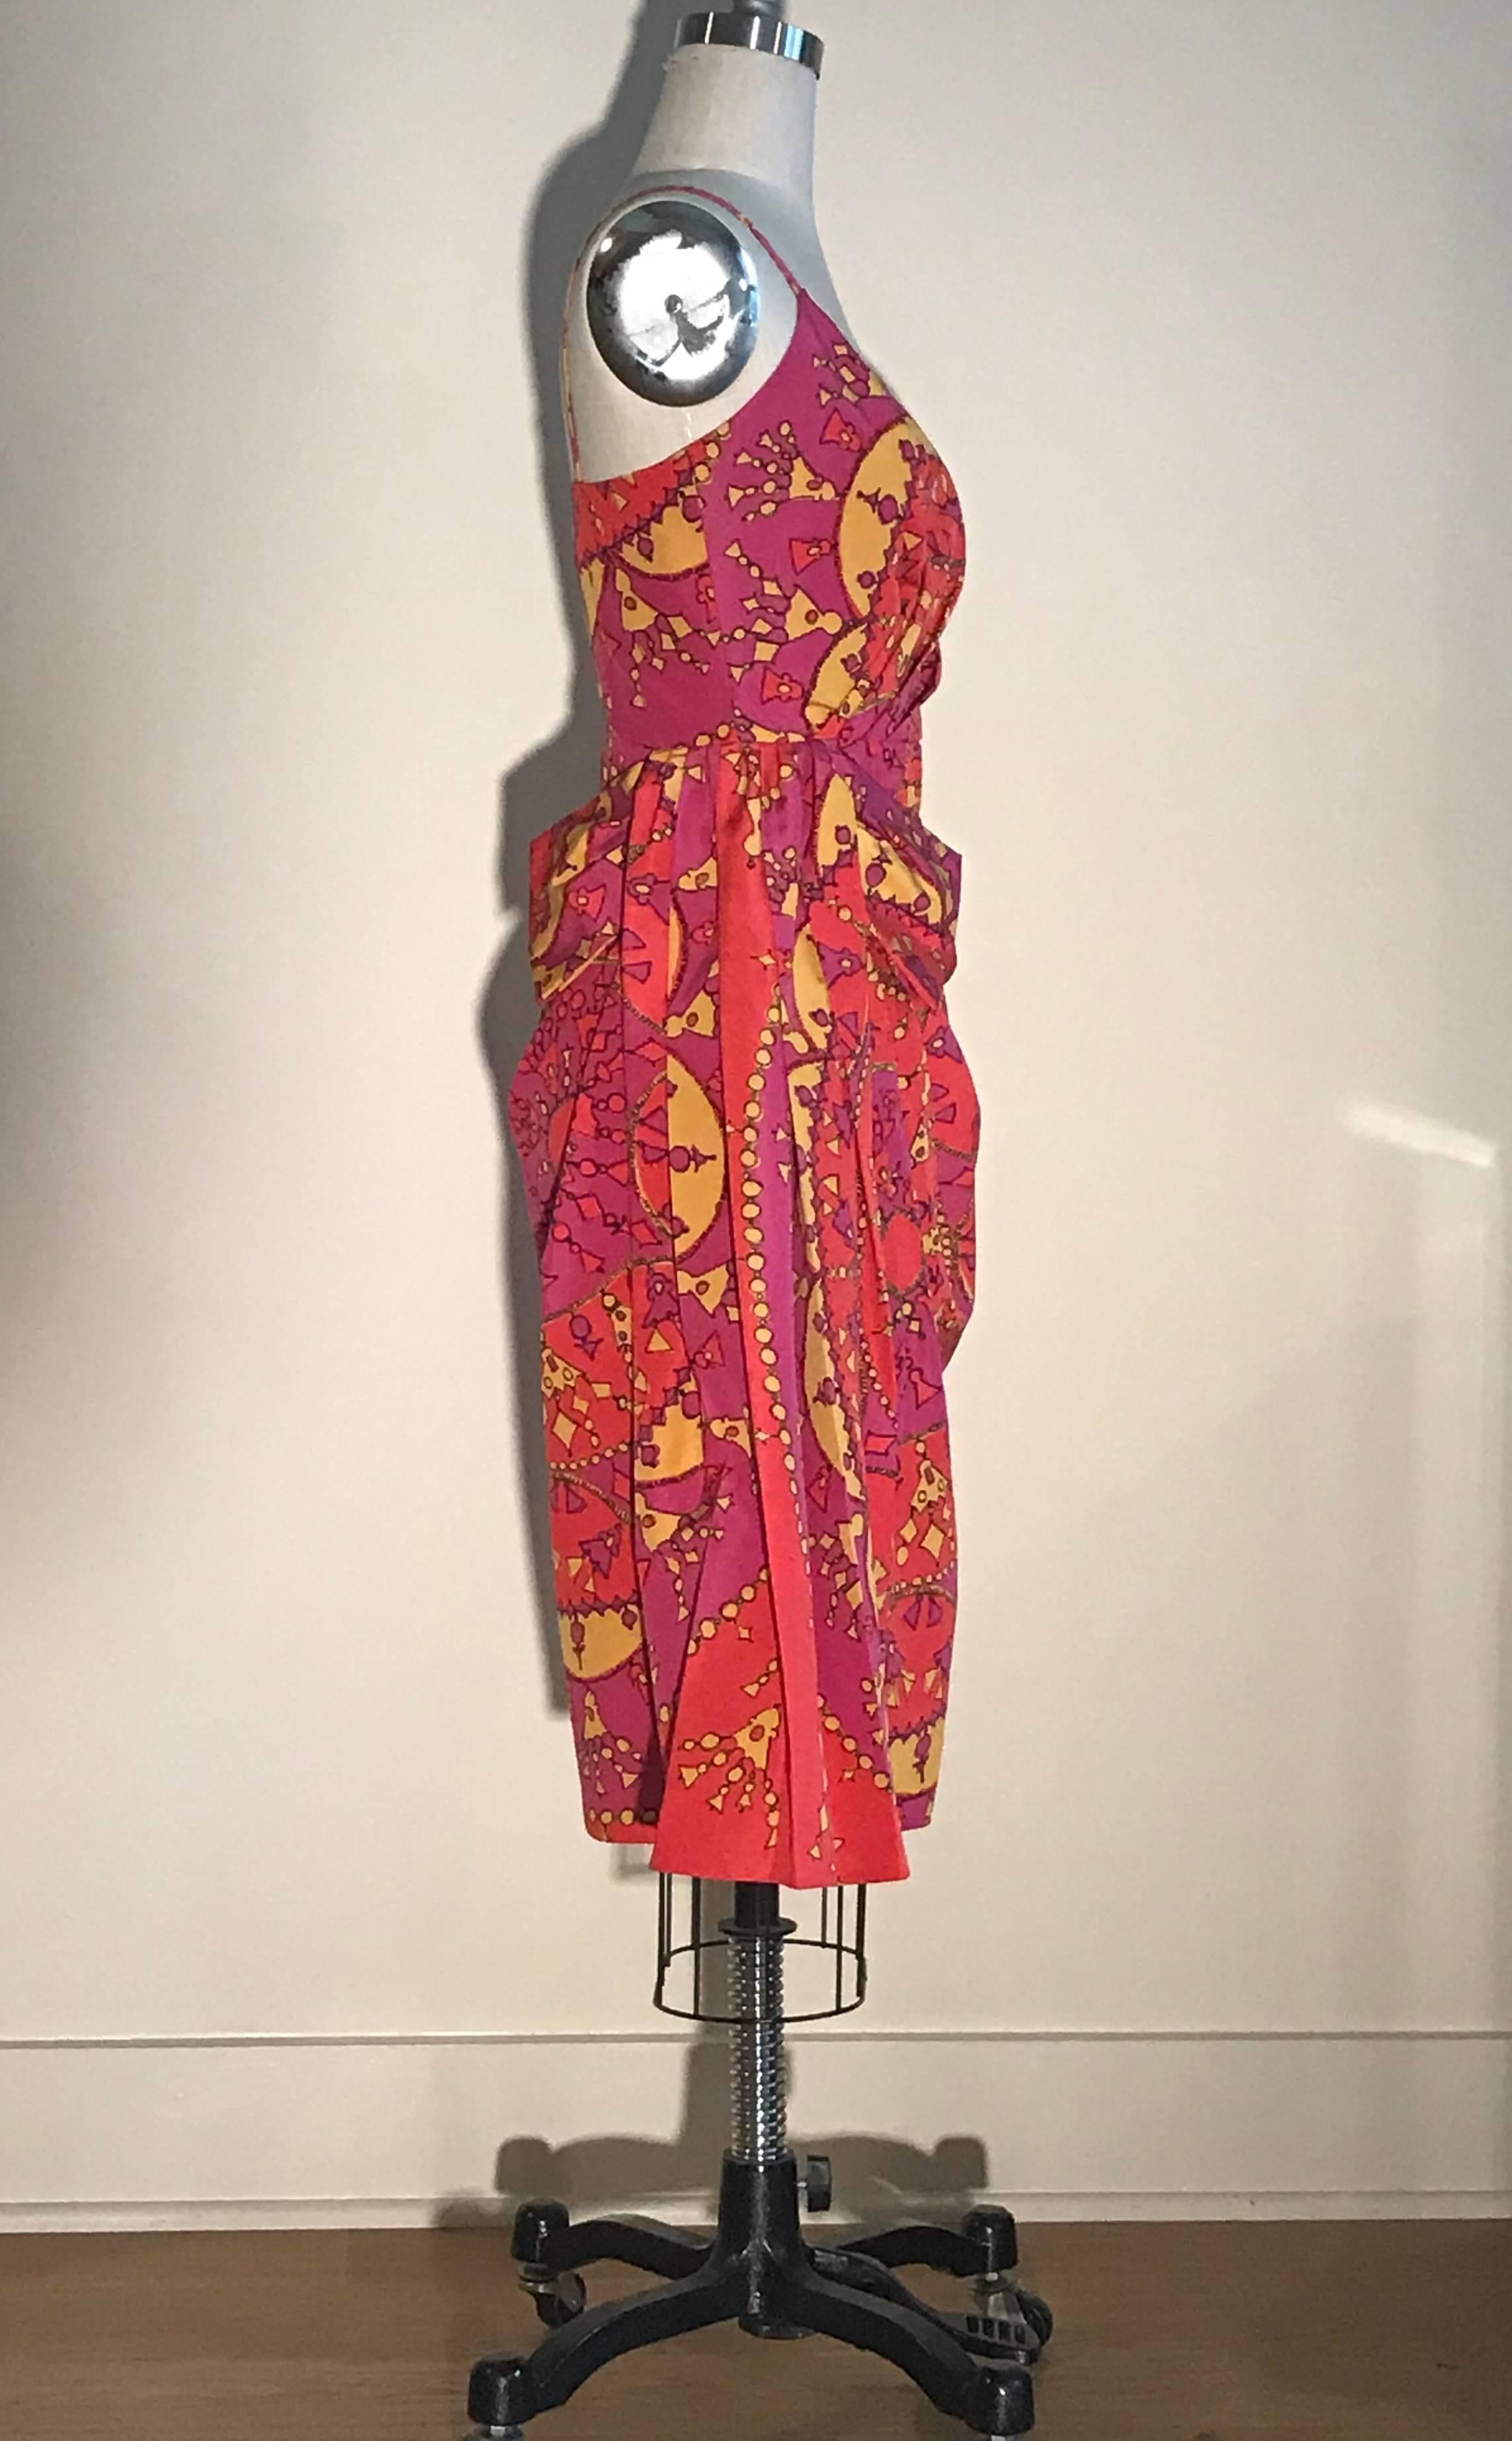 Christian Dior pink and yellow tassel pendant print dress. Draped detail creates volume at waist and a bow like flourish at side. Side zip and hook and eye.

51% cotton, 49% silk.
Fully lined in 100% silk.

Made in France.

Labelled size FR 38, US 6